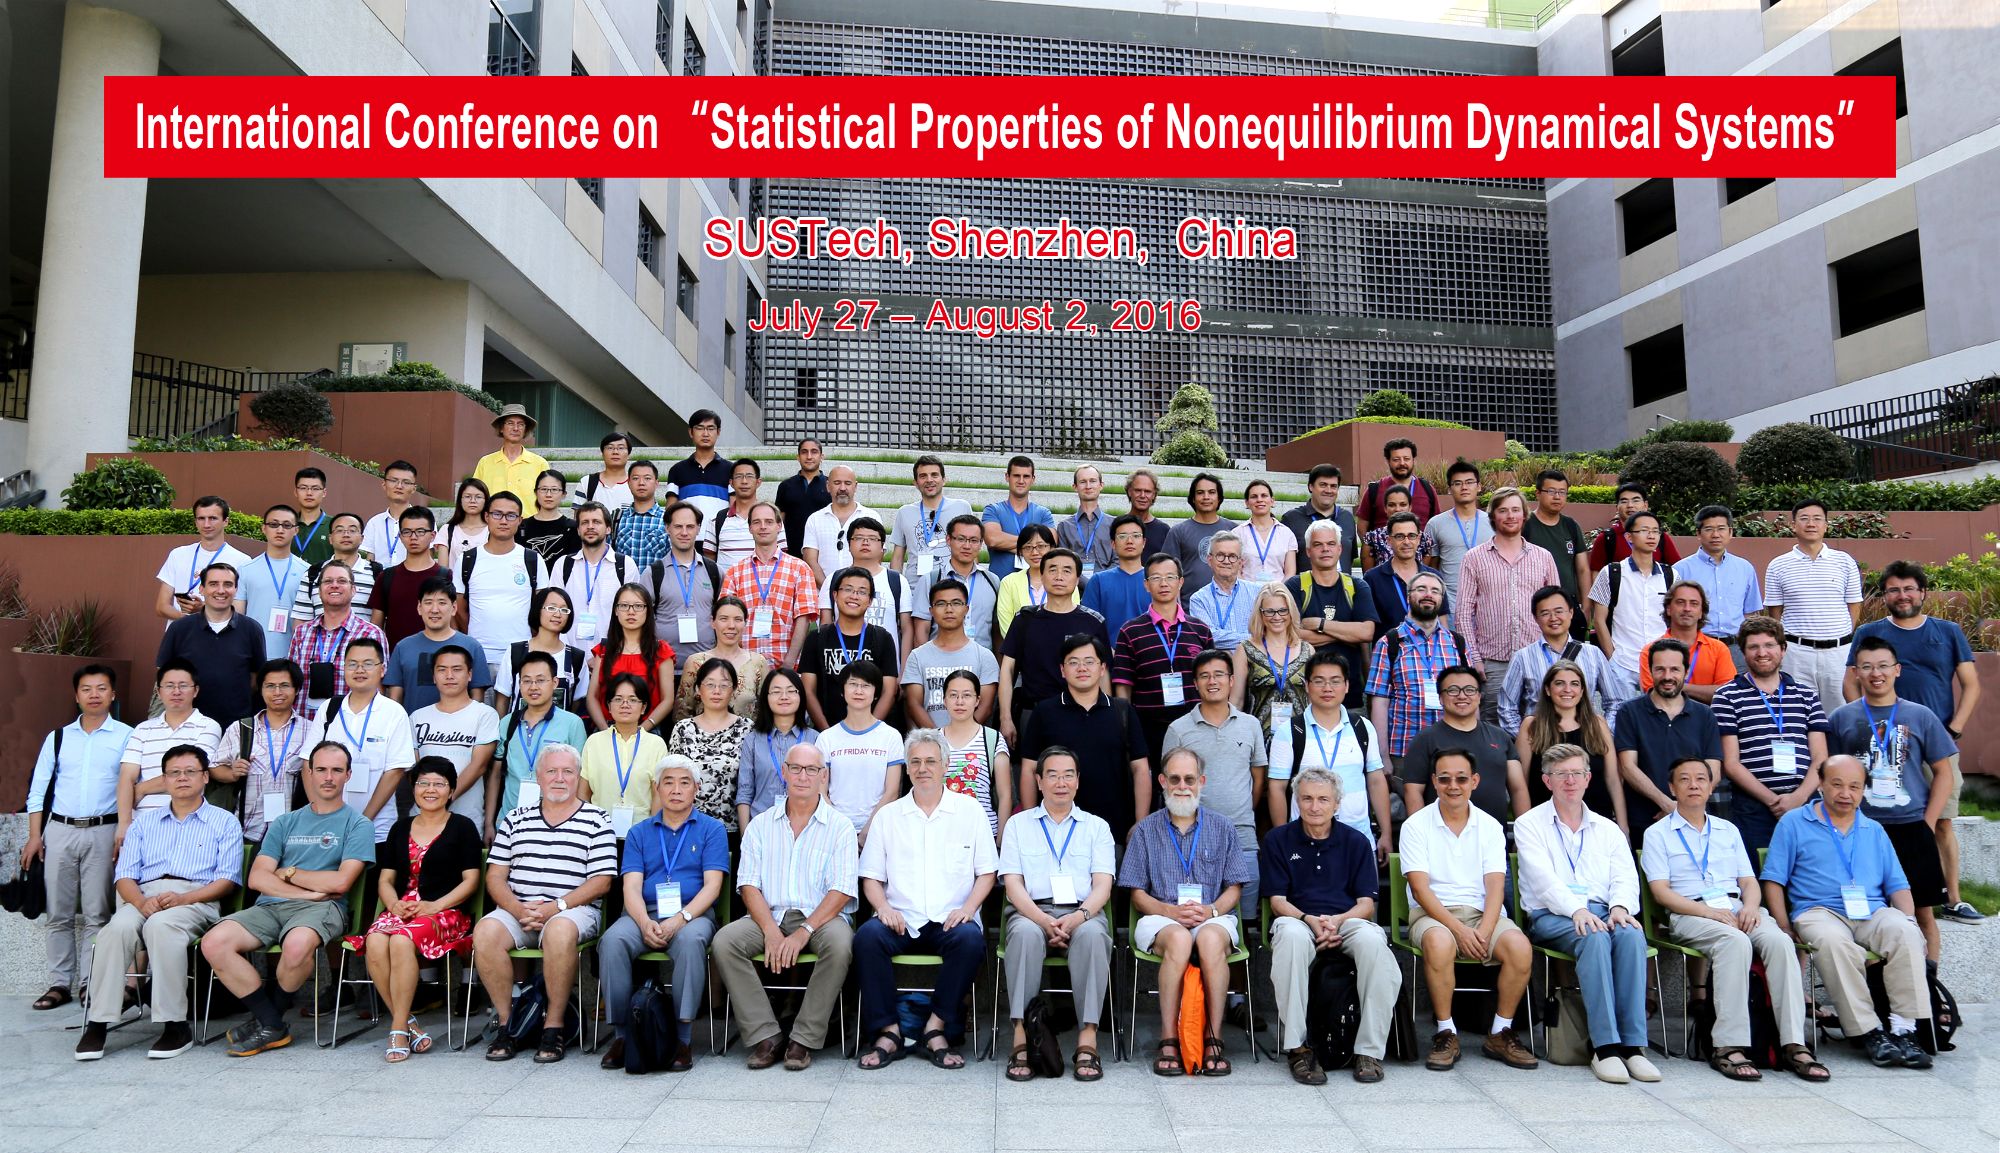 International Conference on “Statistical Properties of Nonequilibrium Dynamical Systems” held in SUSTech